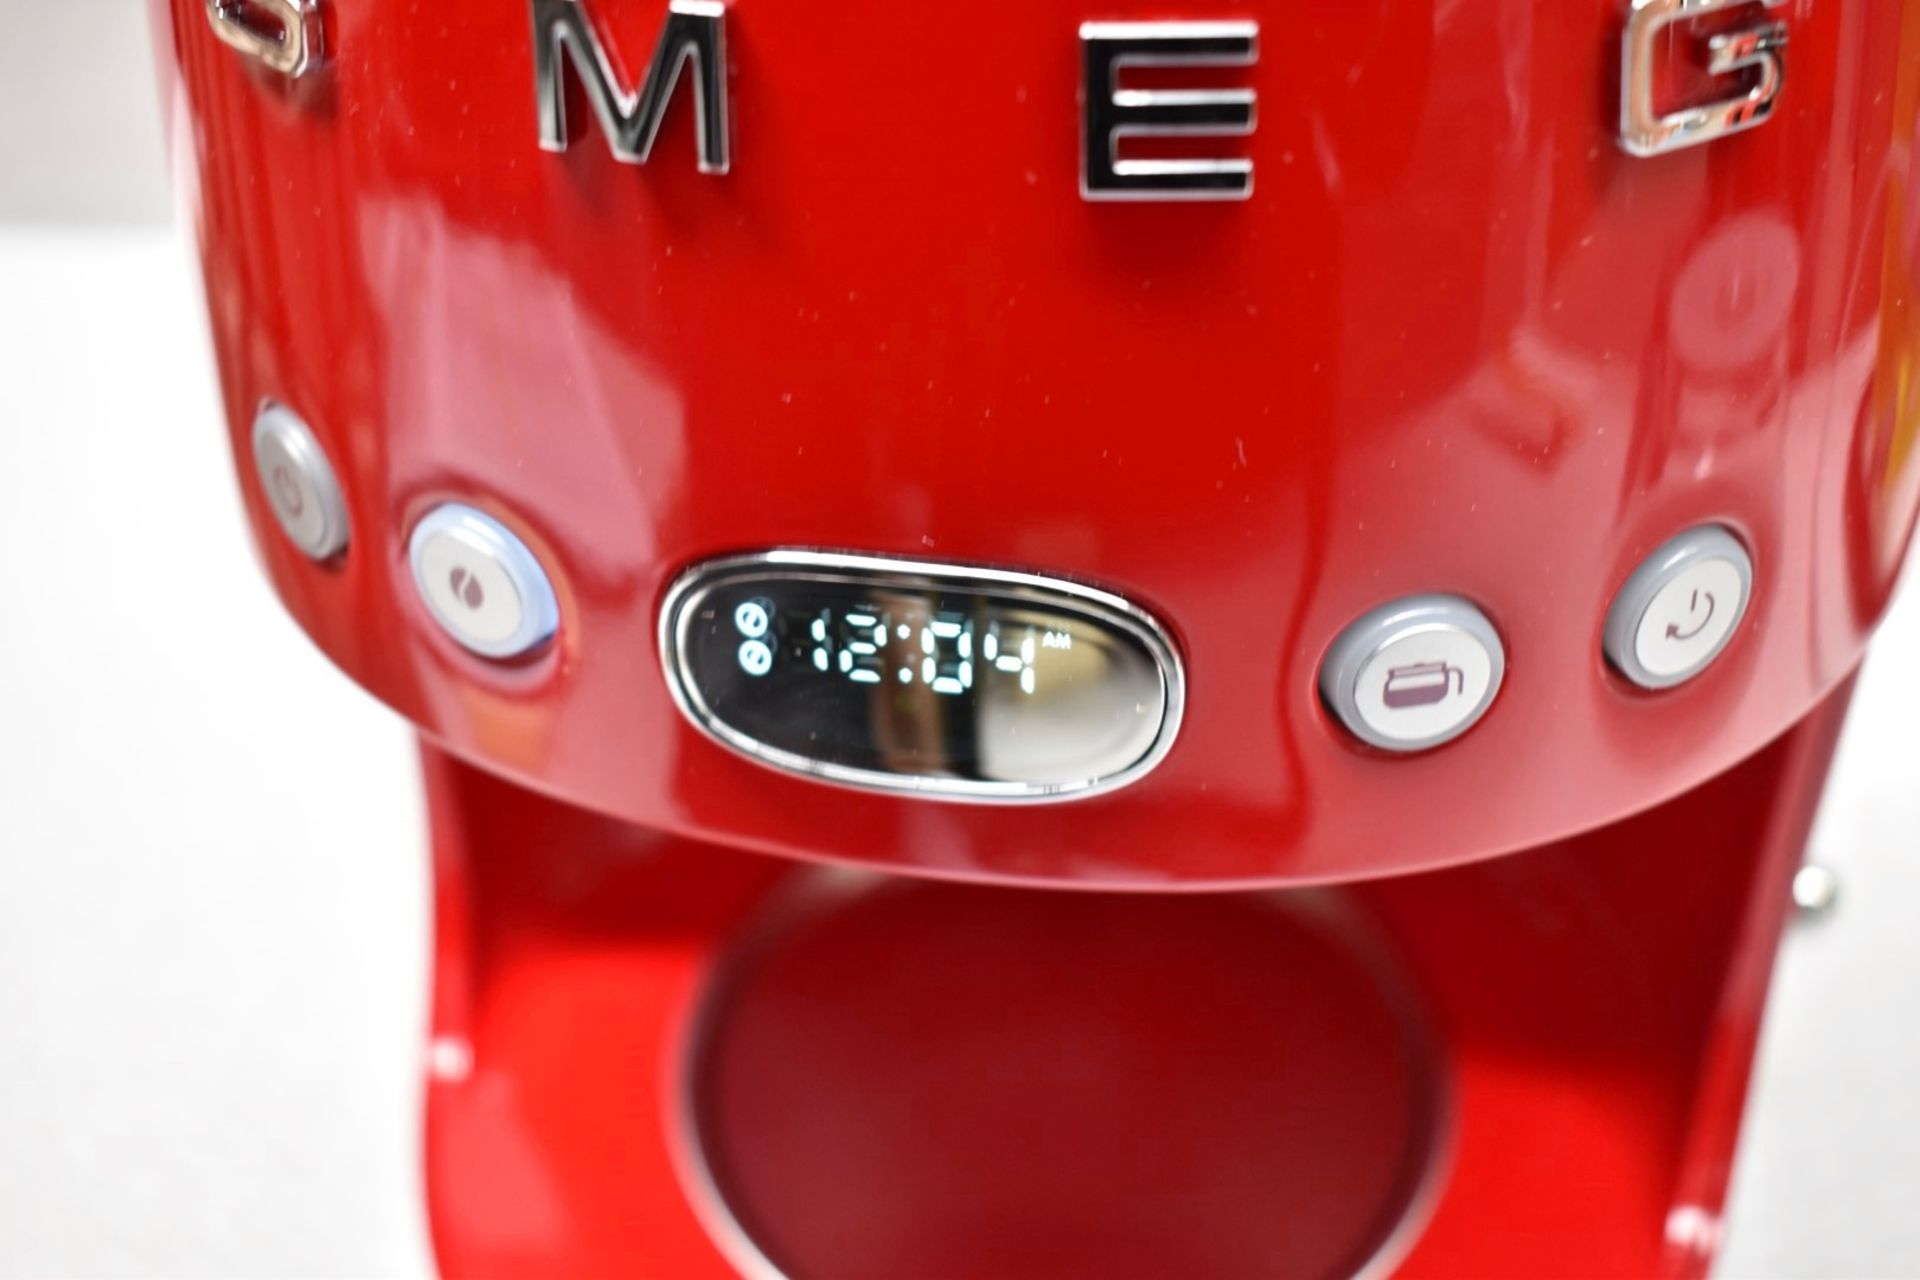 1 x SMEG Drip Retro-Style Filter Coffee Machine In Red, With Reuseable Filter And Digital - Image 8 of 15